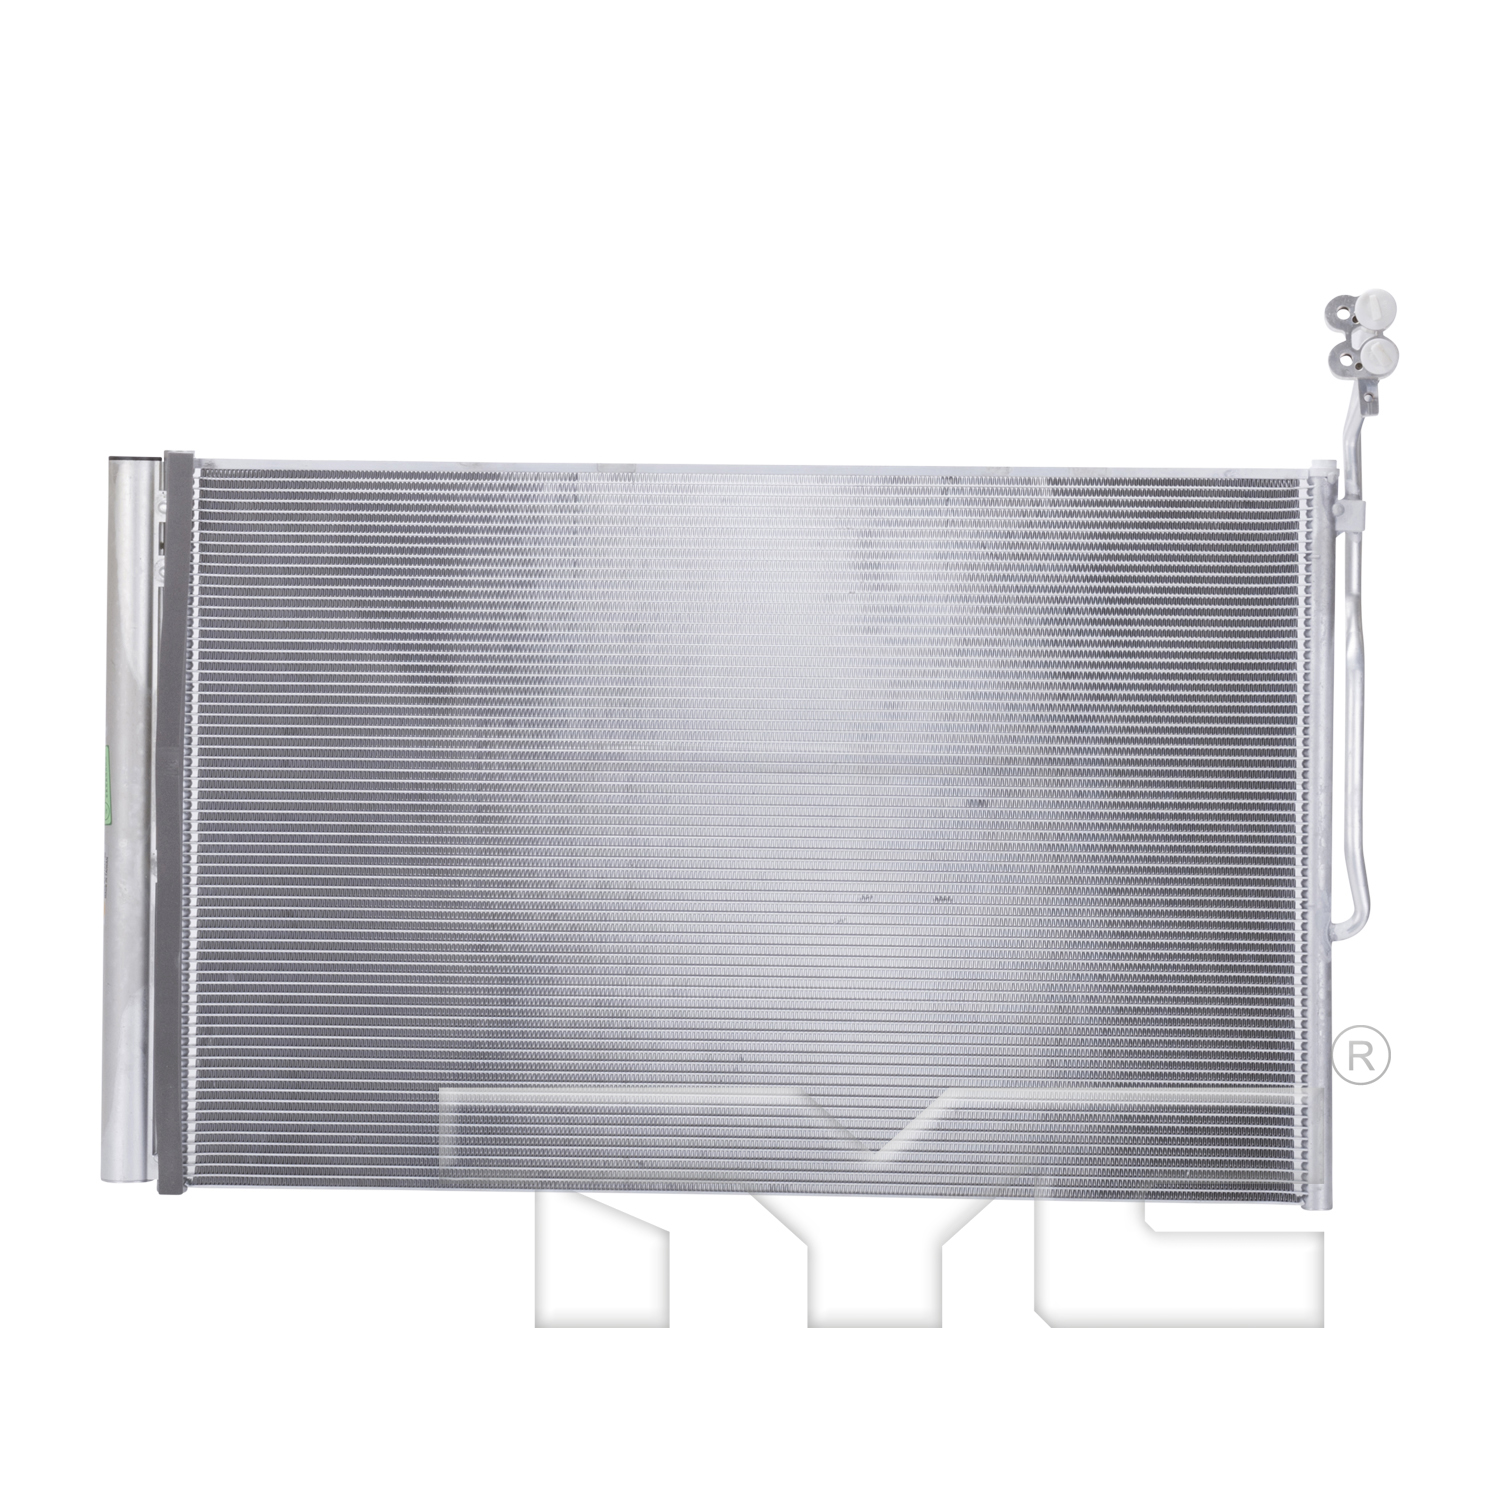 Aftermarket AC CONDENSERS for VOLKSWAGEN - TOUAREG, TOUAREG,11-17,Air conditioning condenser